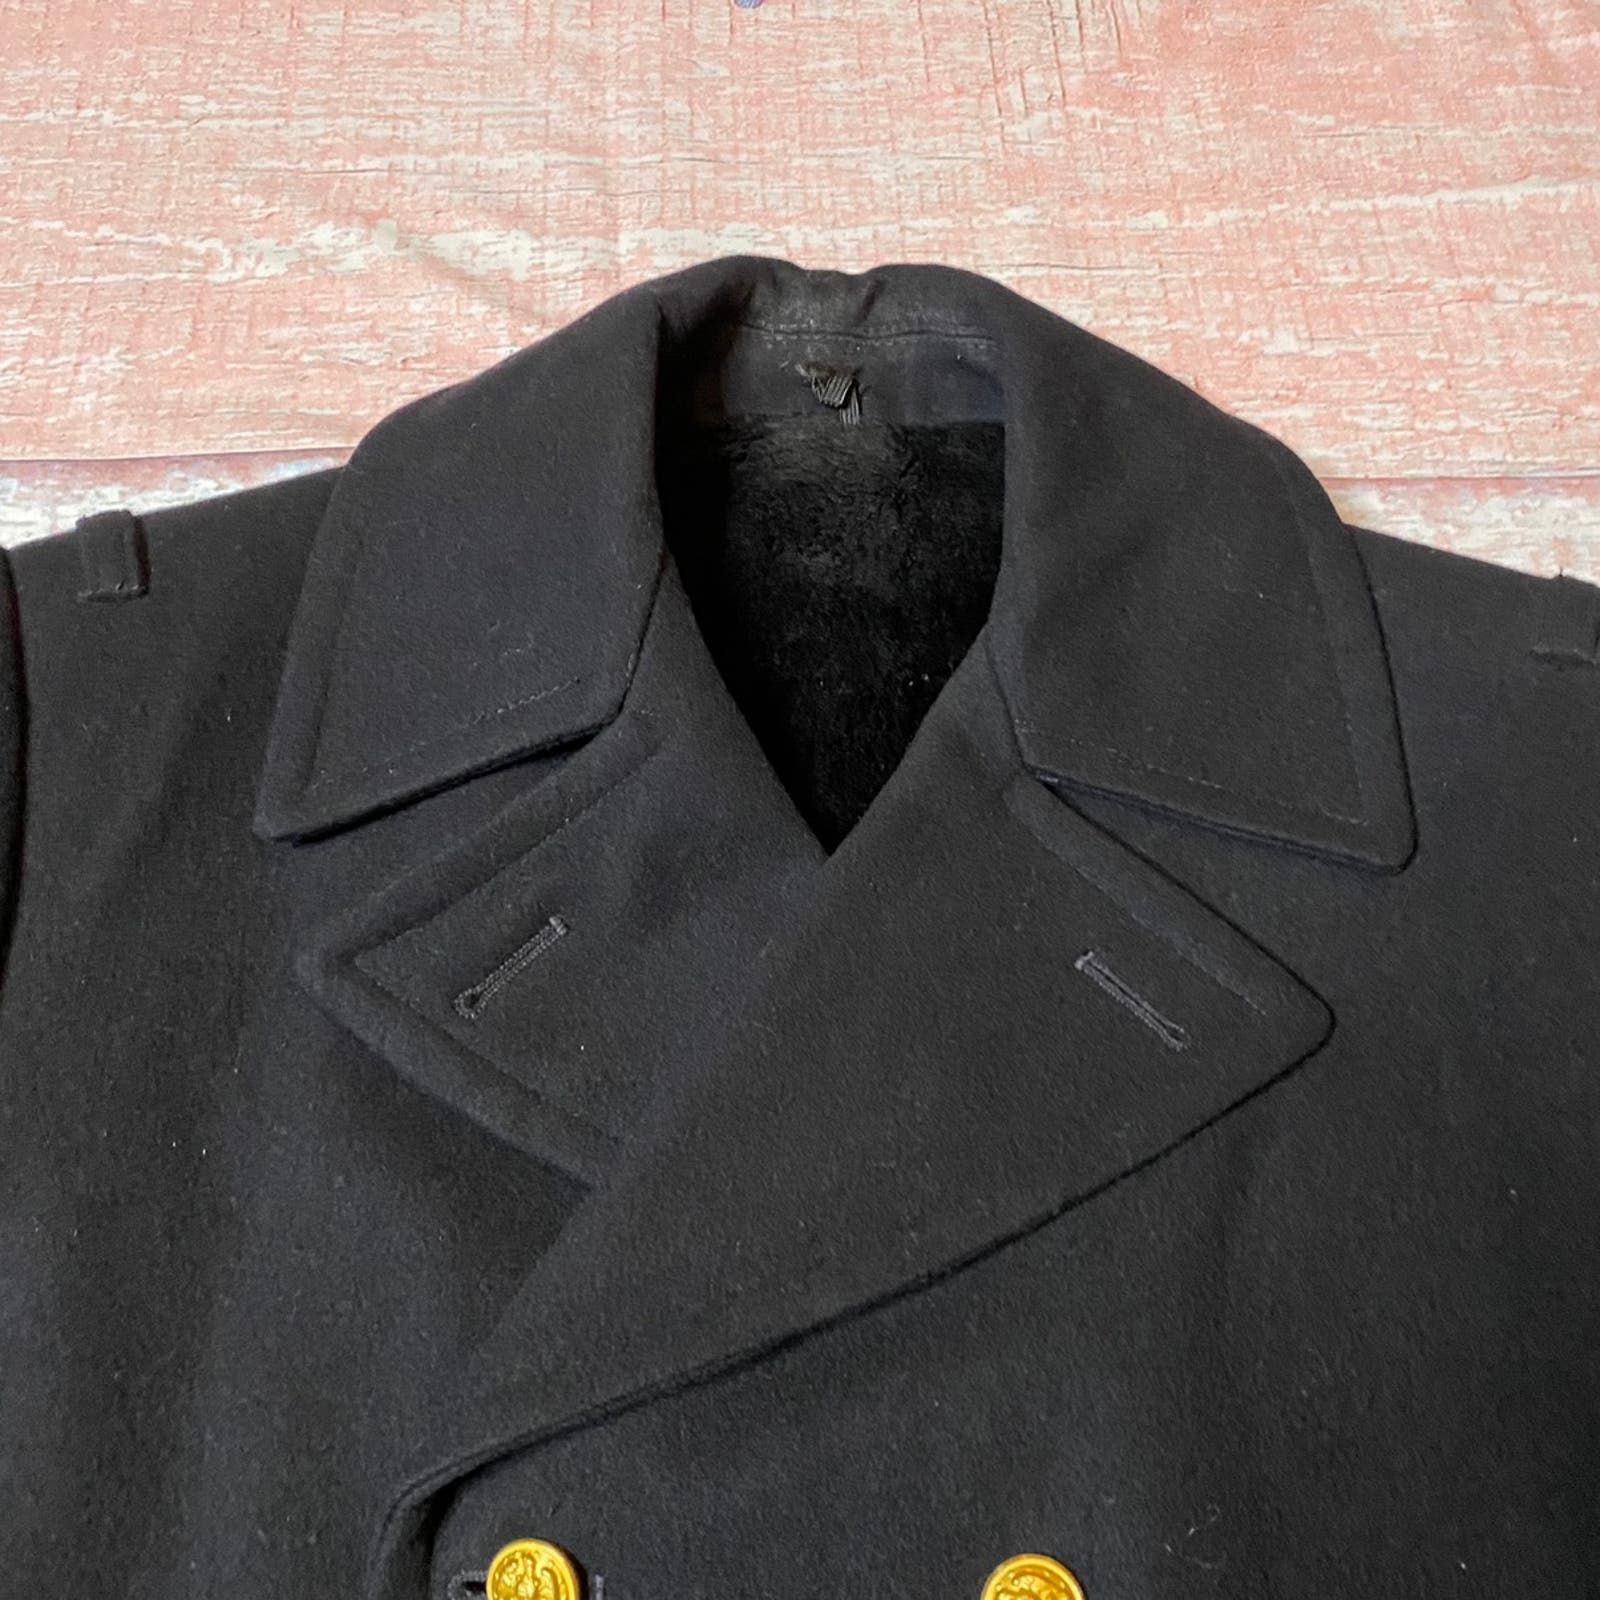 Other Neptune Garment Co Black Wool Military Pea Coat Size Small Size US S / EU 44-46 / 1 - 3 Thumbnail